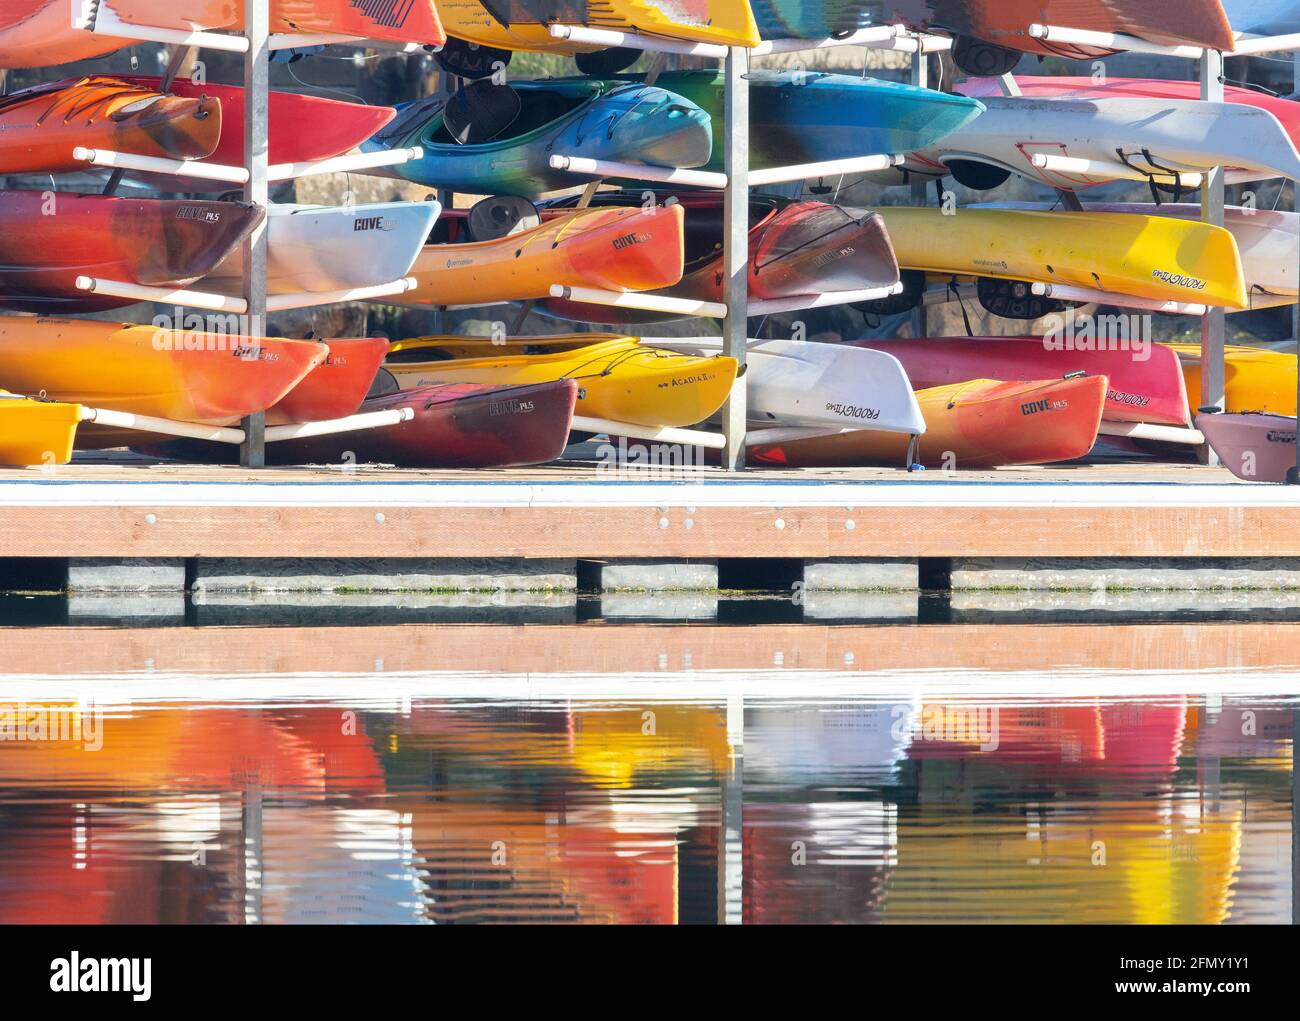 Rental Kayaks Stacked Multiple Colors Stock Photo